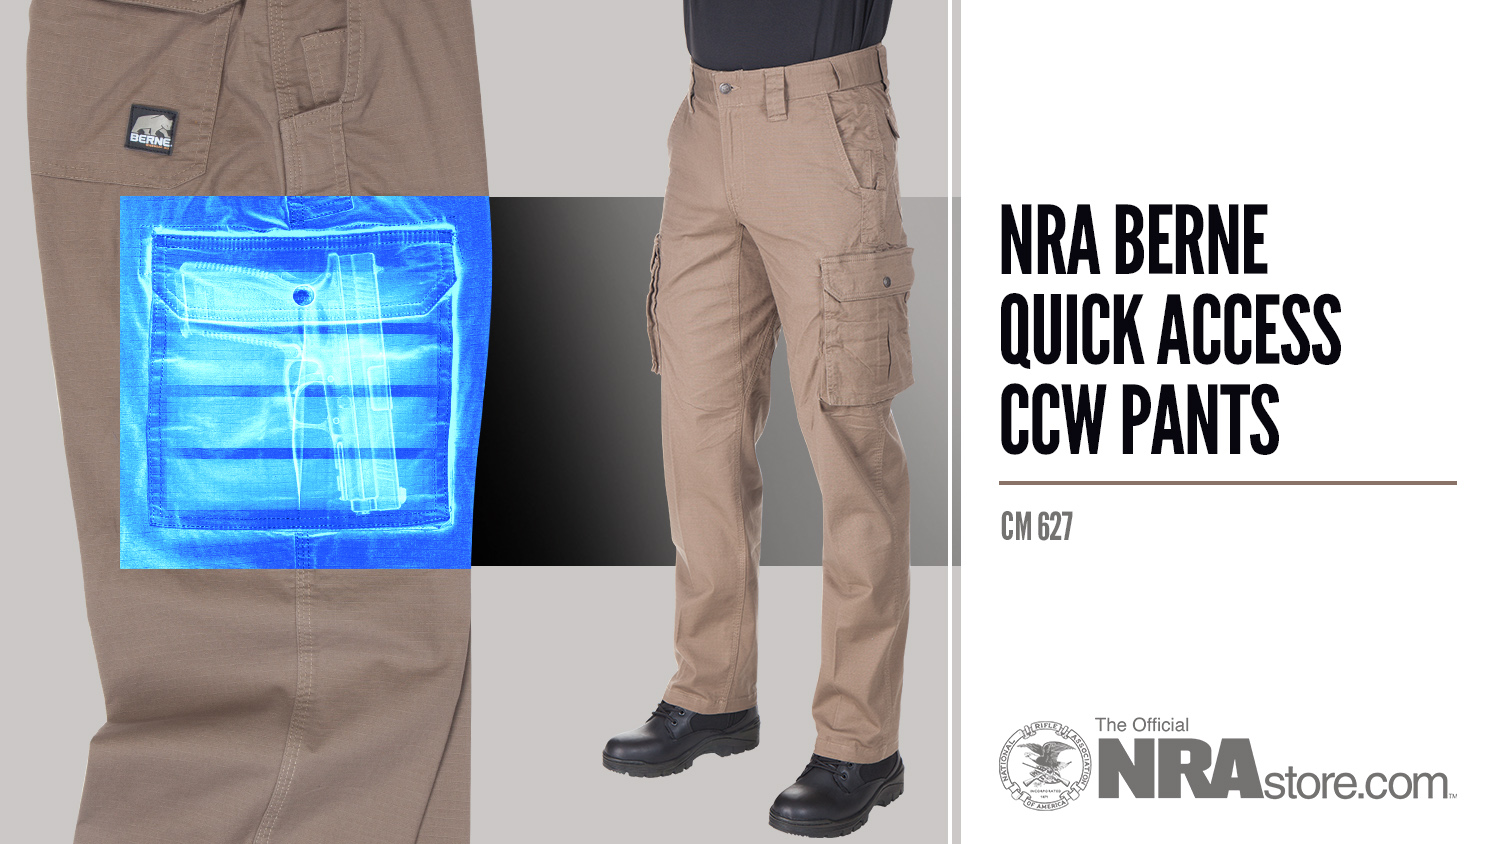 NRAstore Product Highlight: NRA Berne Quick Access CCW Pants